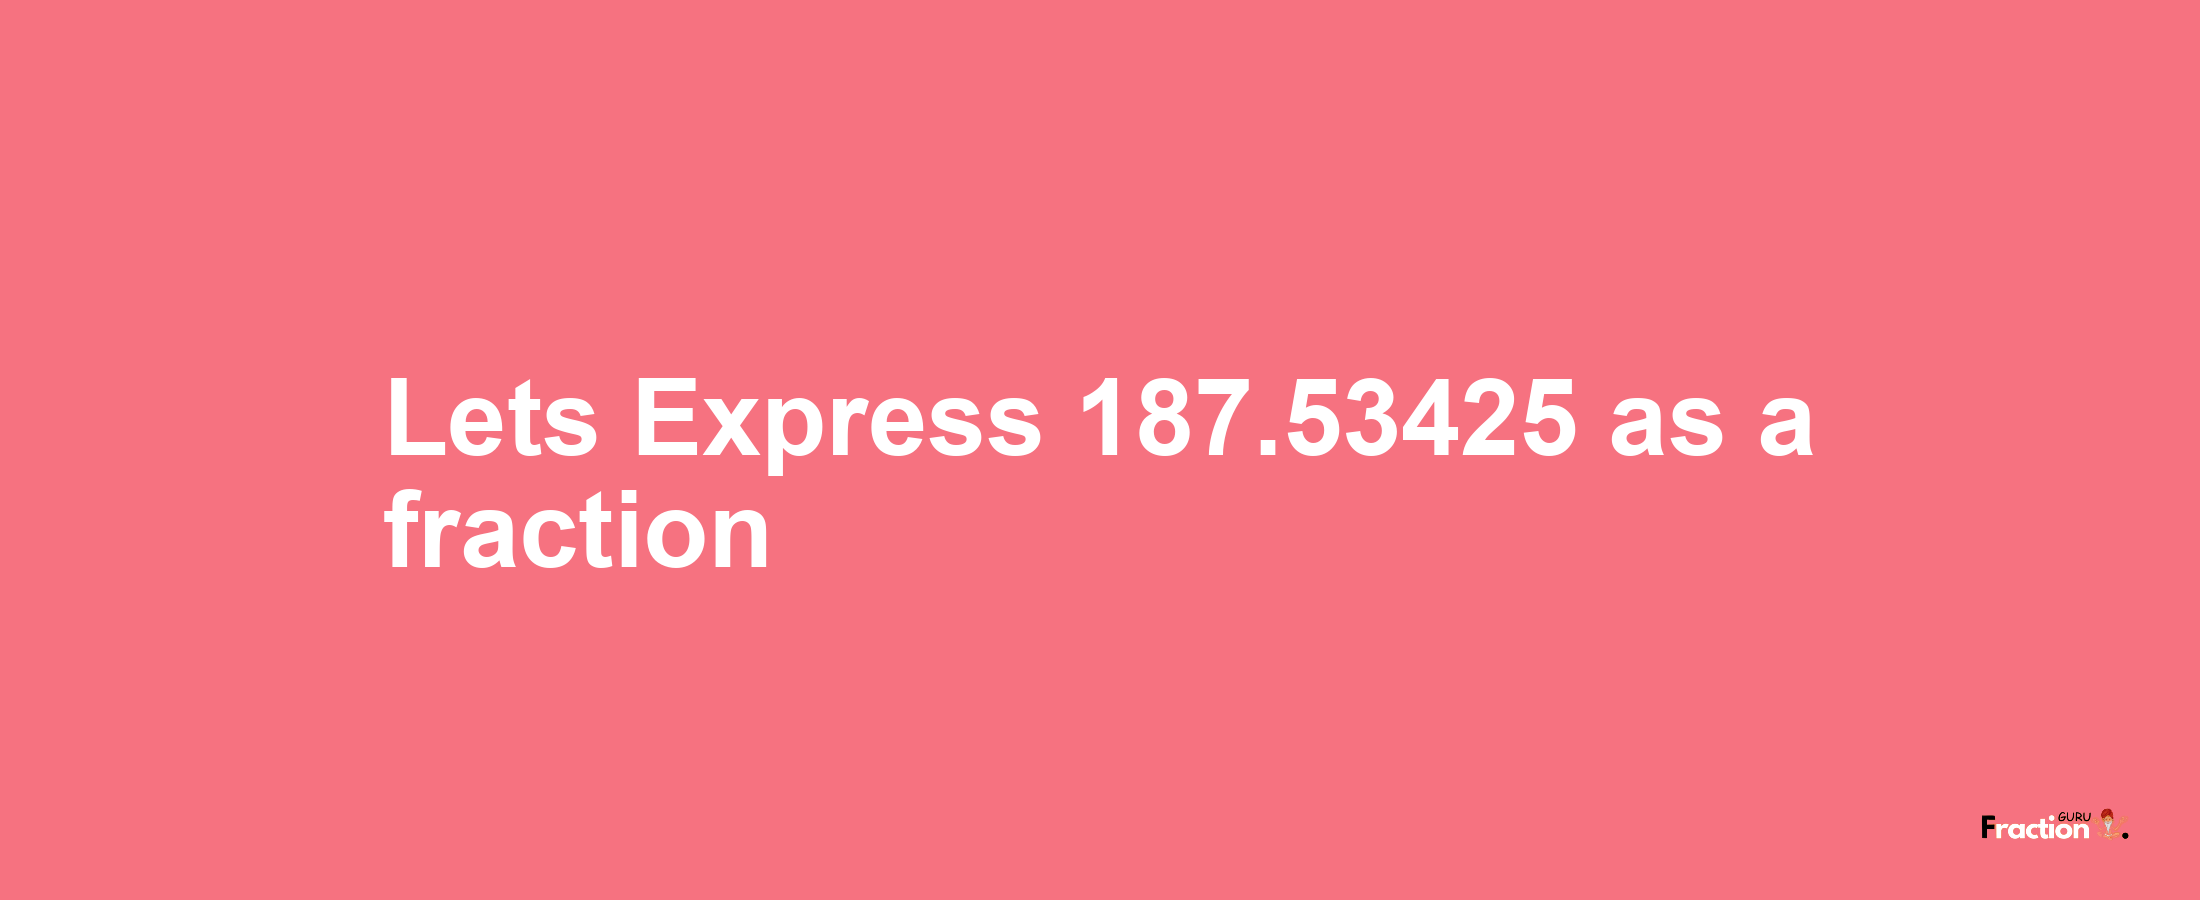 Lets Express 187.53425 as afraction